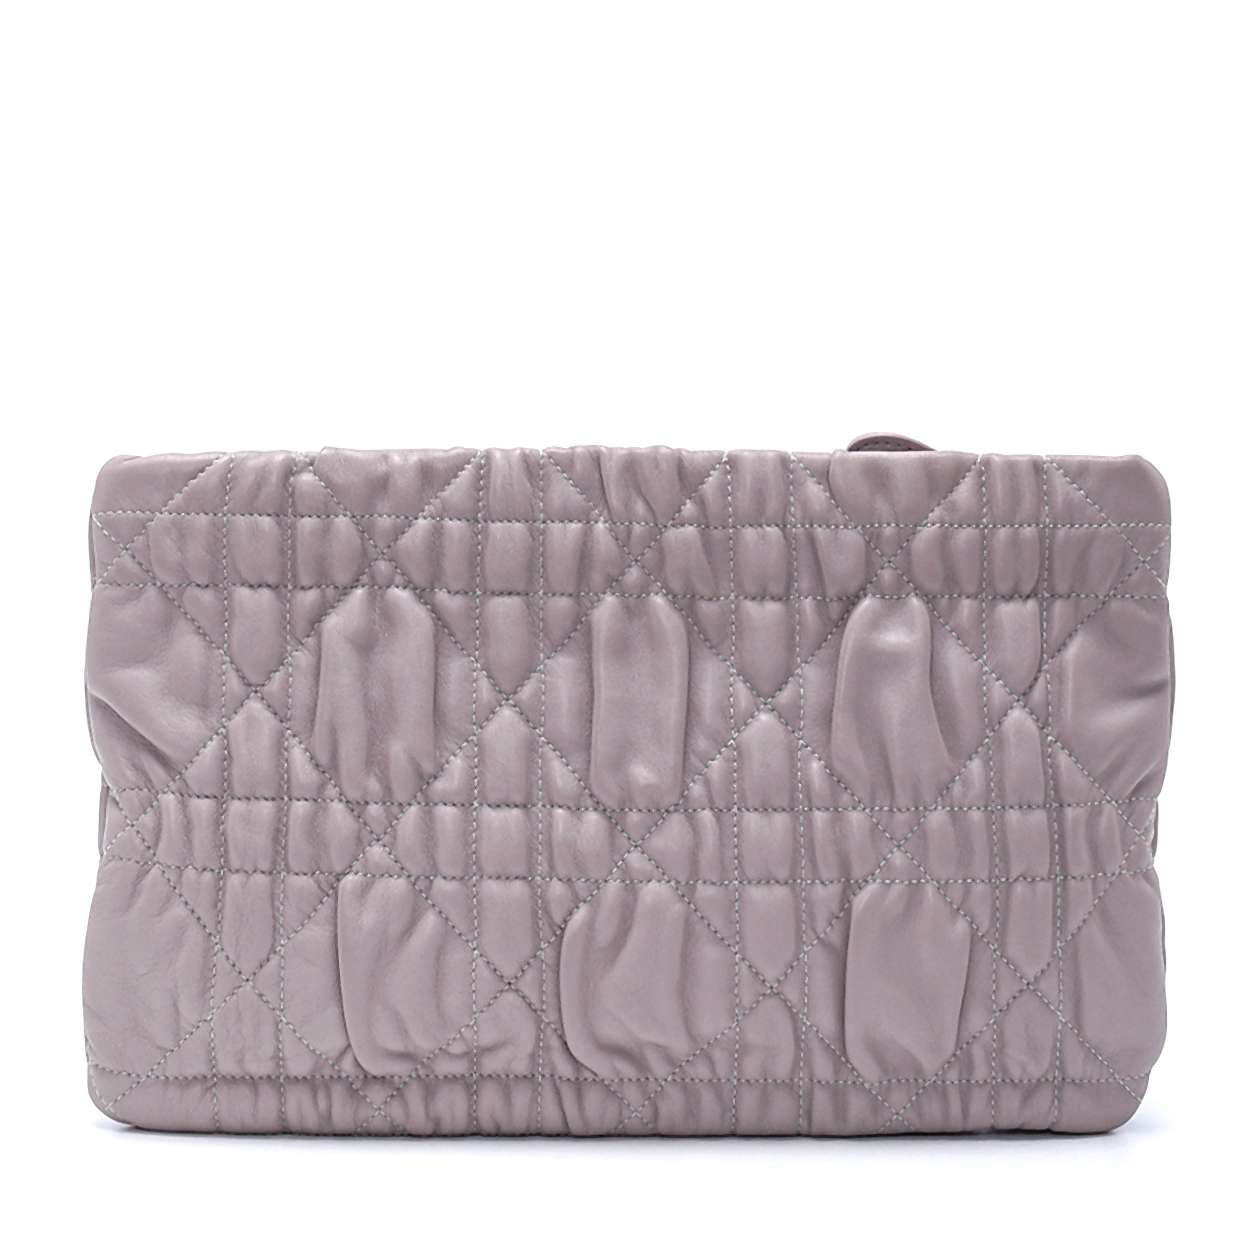 Christian Dior - Lilac Delices Lambskin Leather Clutch 